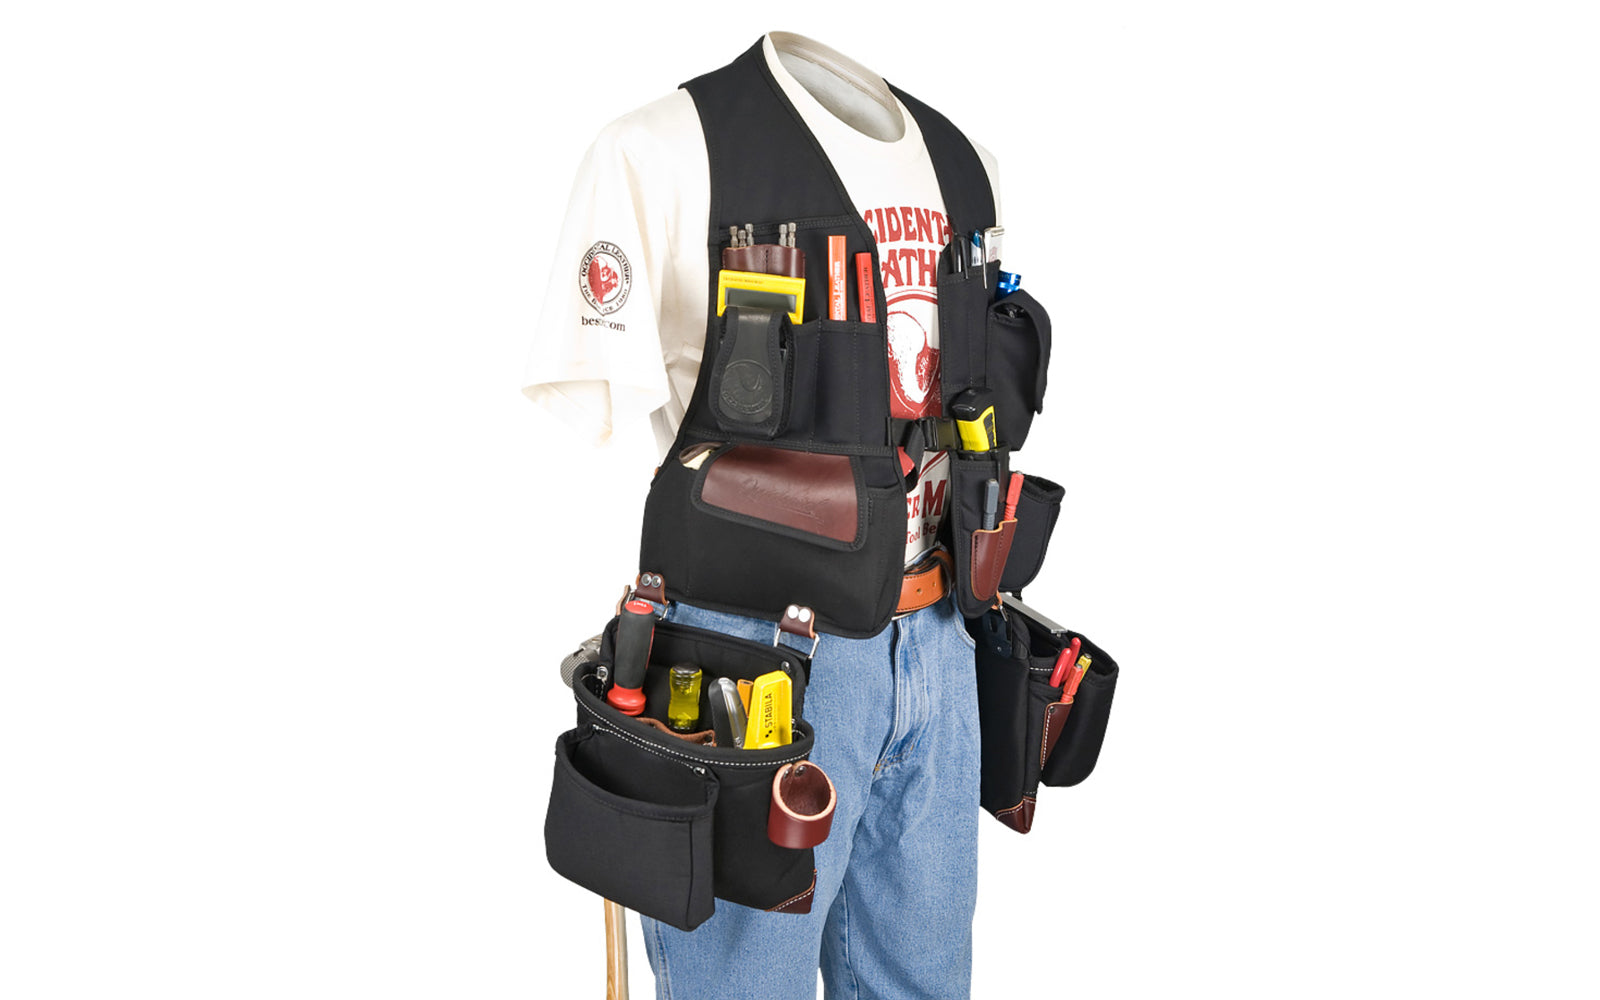 Occidental Leather "Builders' Vest" Framer Package system is a compact tool vest carrying system, loaded with holders & pockets. A belt-free system combined with clip-on framing bags. 36 total pockets & tool holders. Special tool vest system No. 2585. Made of industrial nylon material & genuine leather. 759244275605